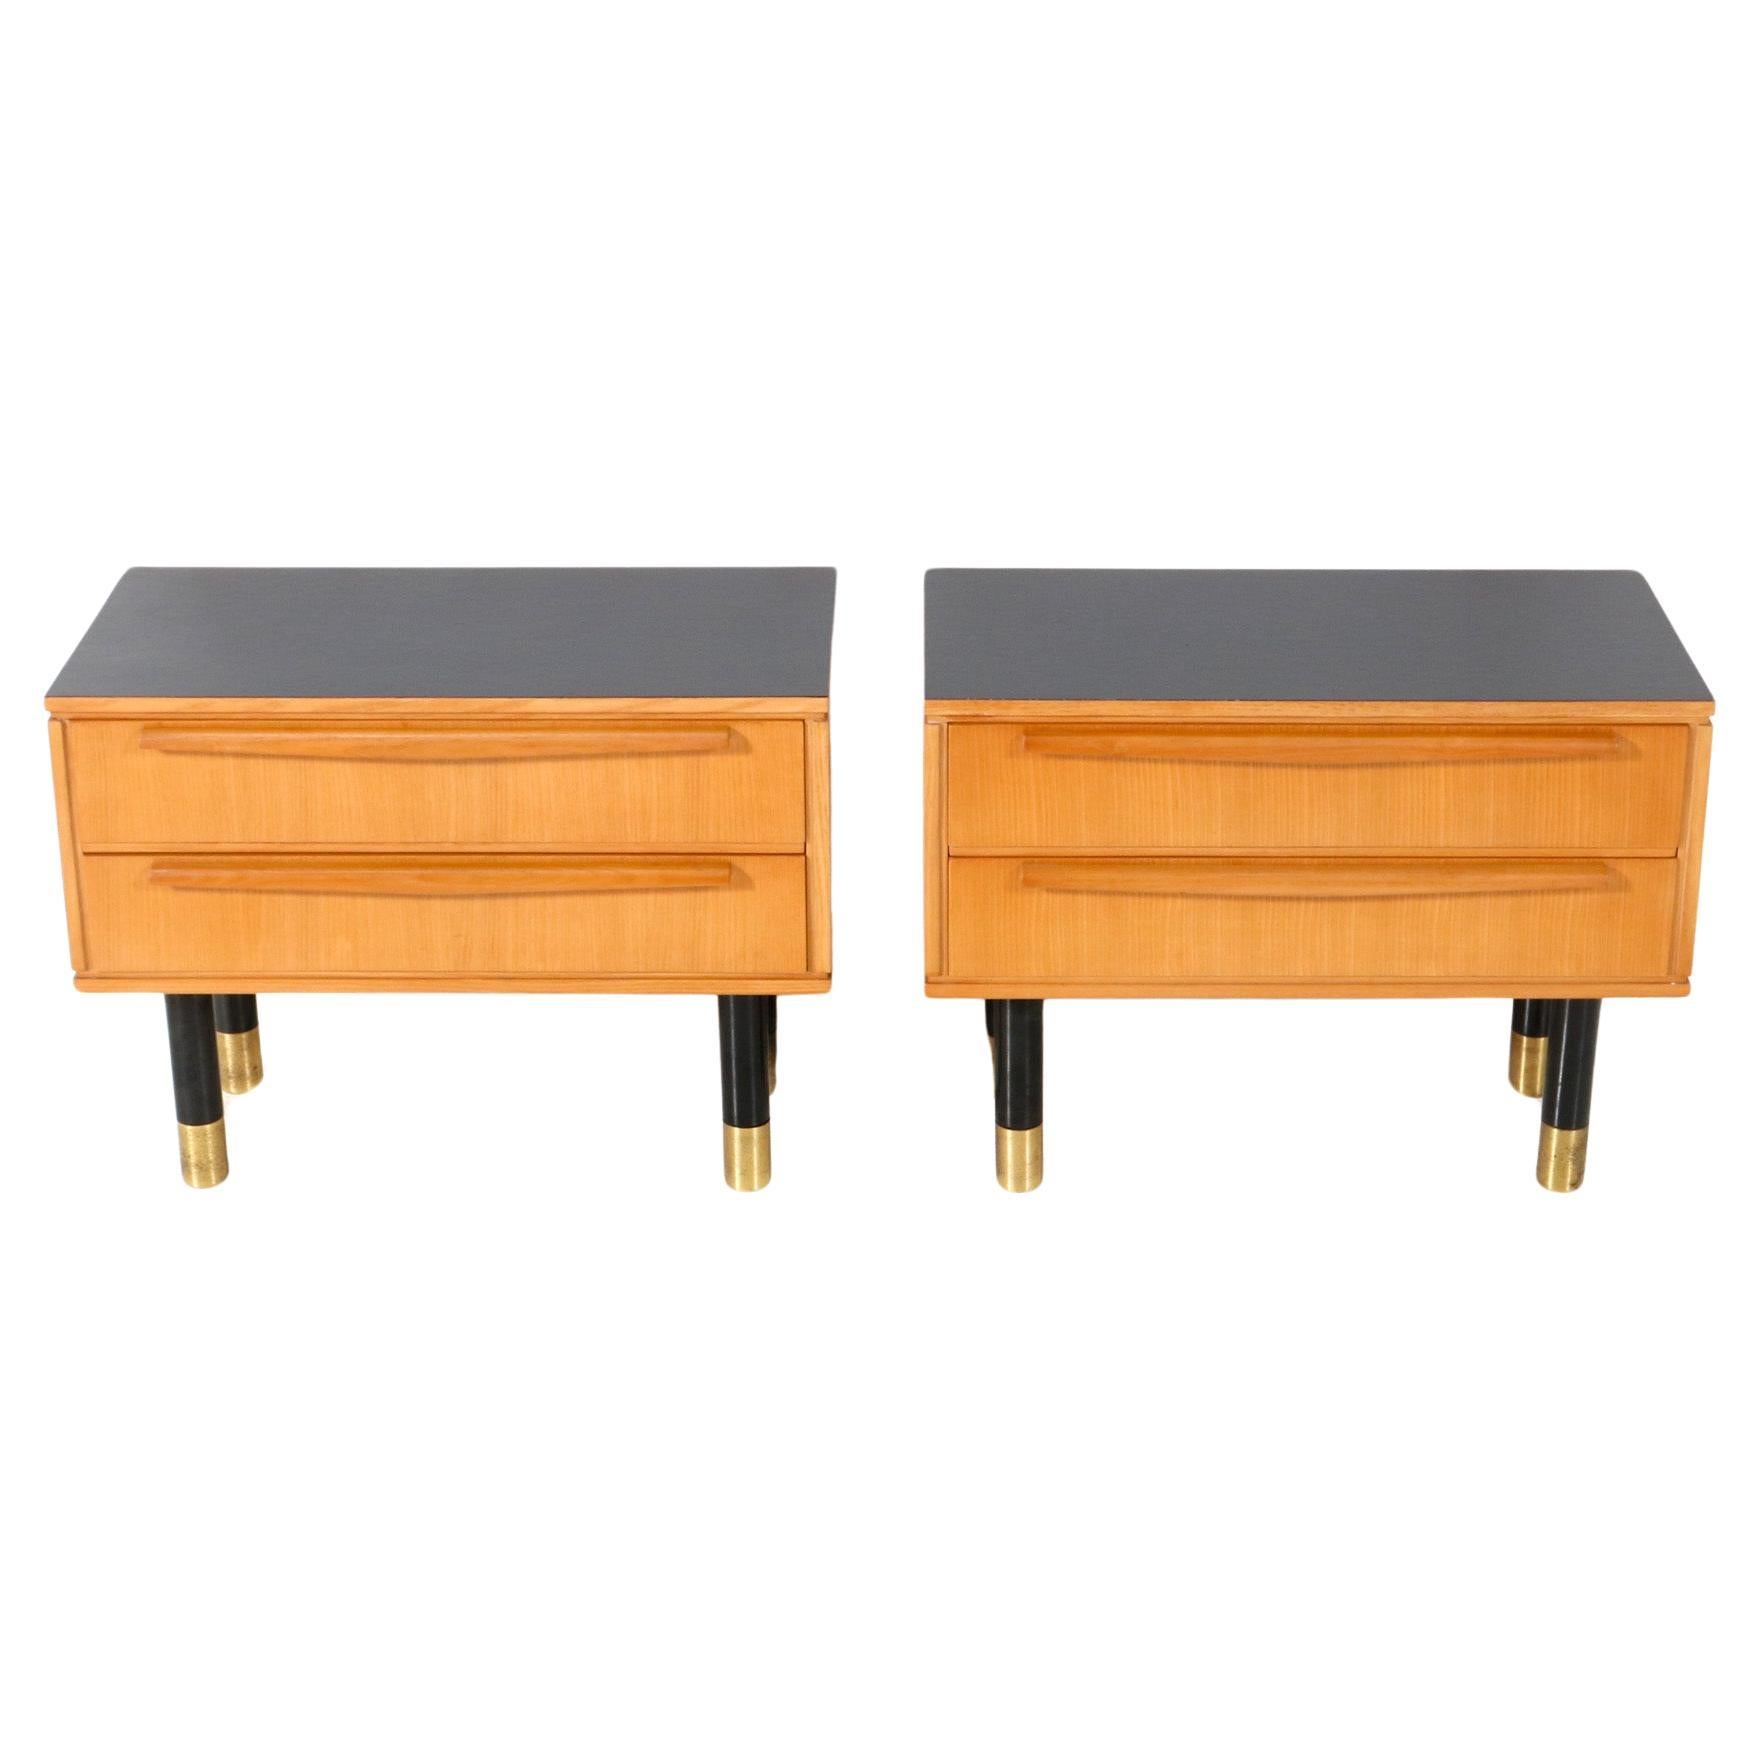 Two Ash Mid-Century Modern Nightstands or Bedside Tables, 1950s For Sale